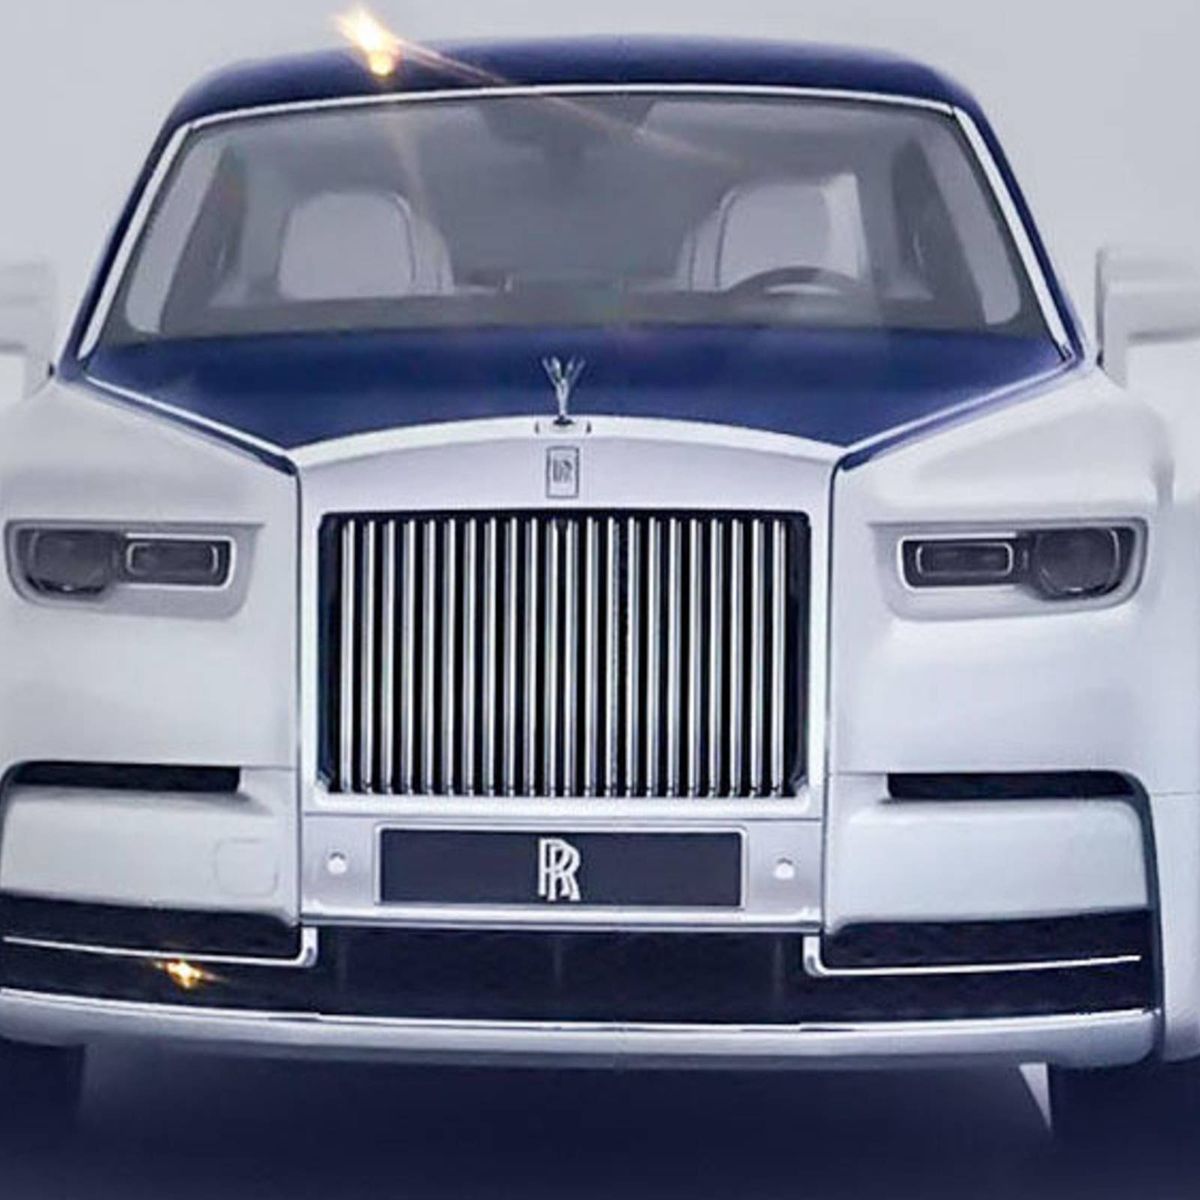 Take An Early Look At The Facelifted Rolls-Royce Cullinan